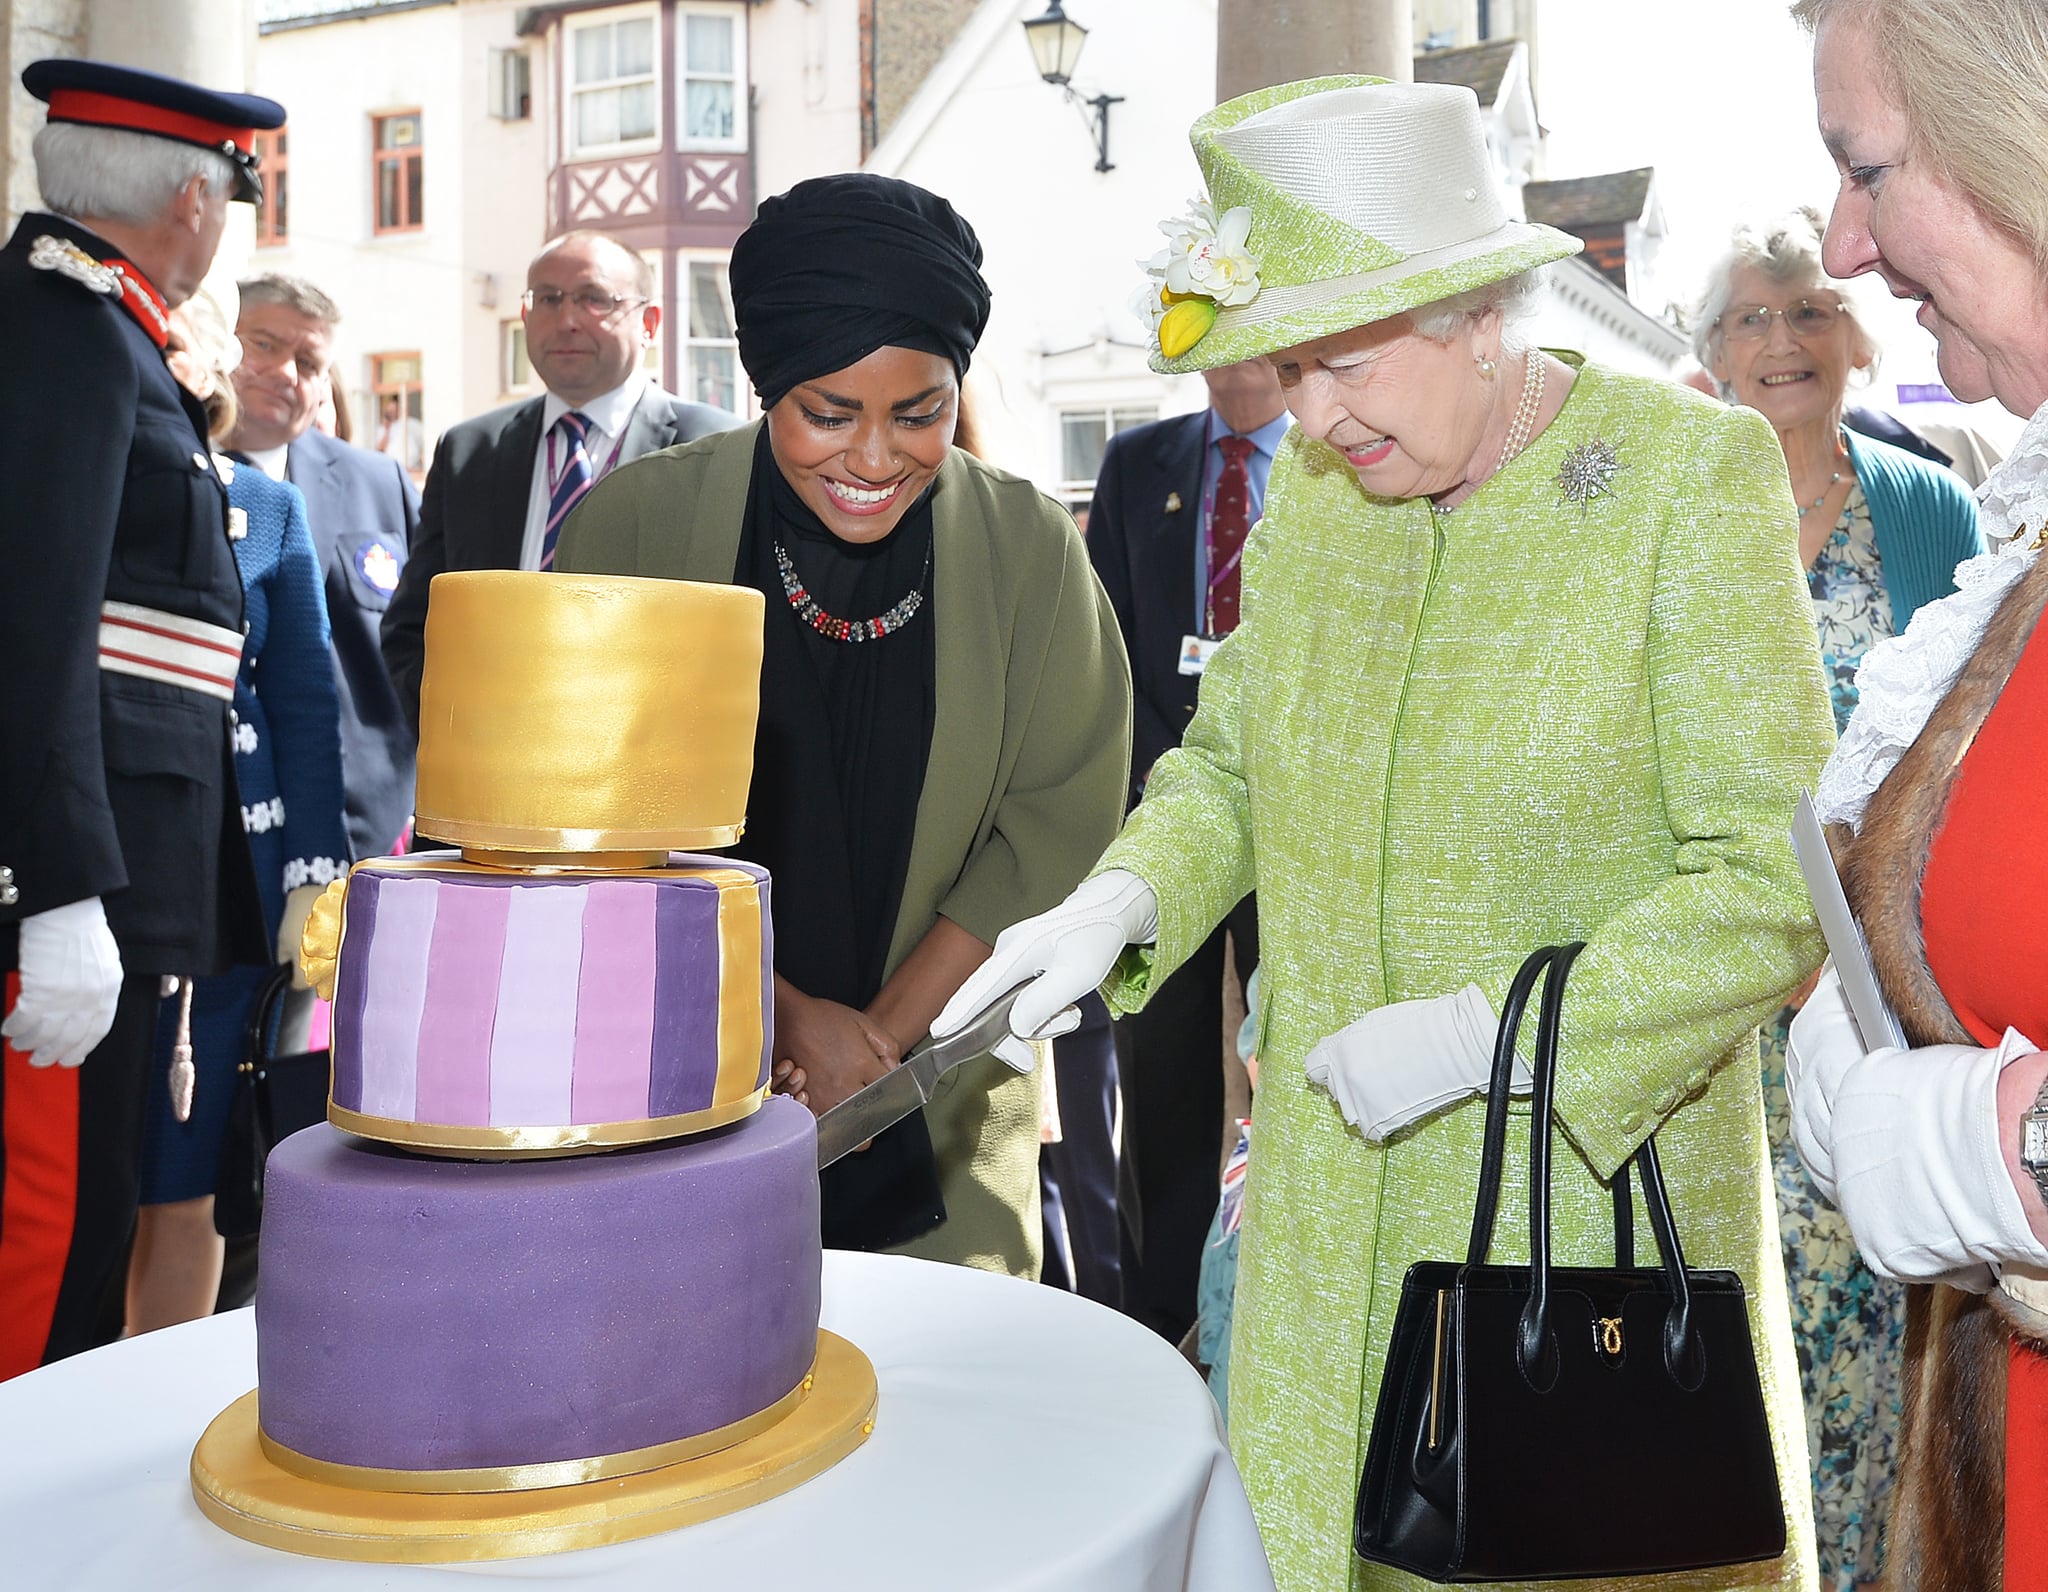 WINDSOR, ENGLAND - APRIL 21:  Queen Elizabeth II receives a birthday cake from Nadiya Hussain, winner of the Great British Bake Off, during her 90th Birthday Walkabout on April 21, 2016 in Windsor, England. Today is Queen Elizabeth II's 90th Birthday. The Queen and Duke of Edinburgh will be carrying out engagements in Windsor.  (Photo by John Stillwell - WPA Pool/Getty Images)